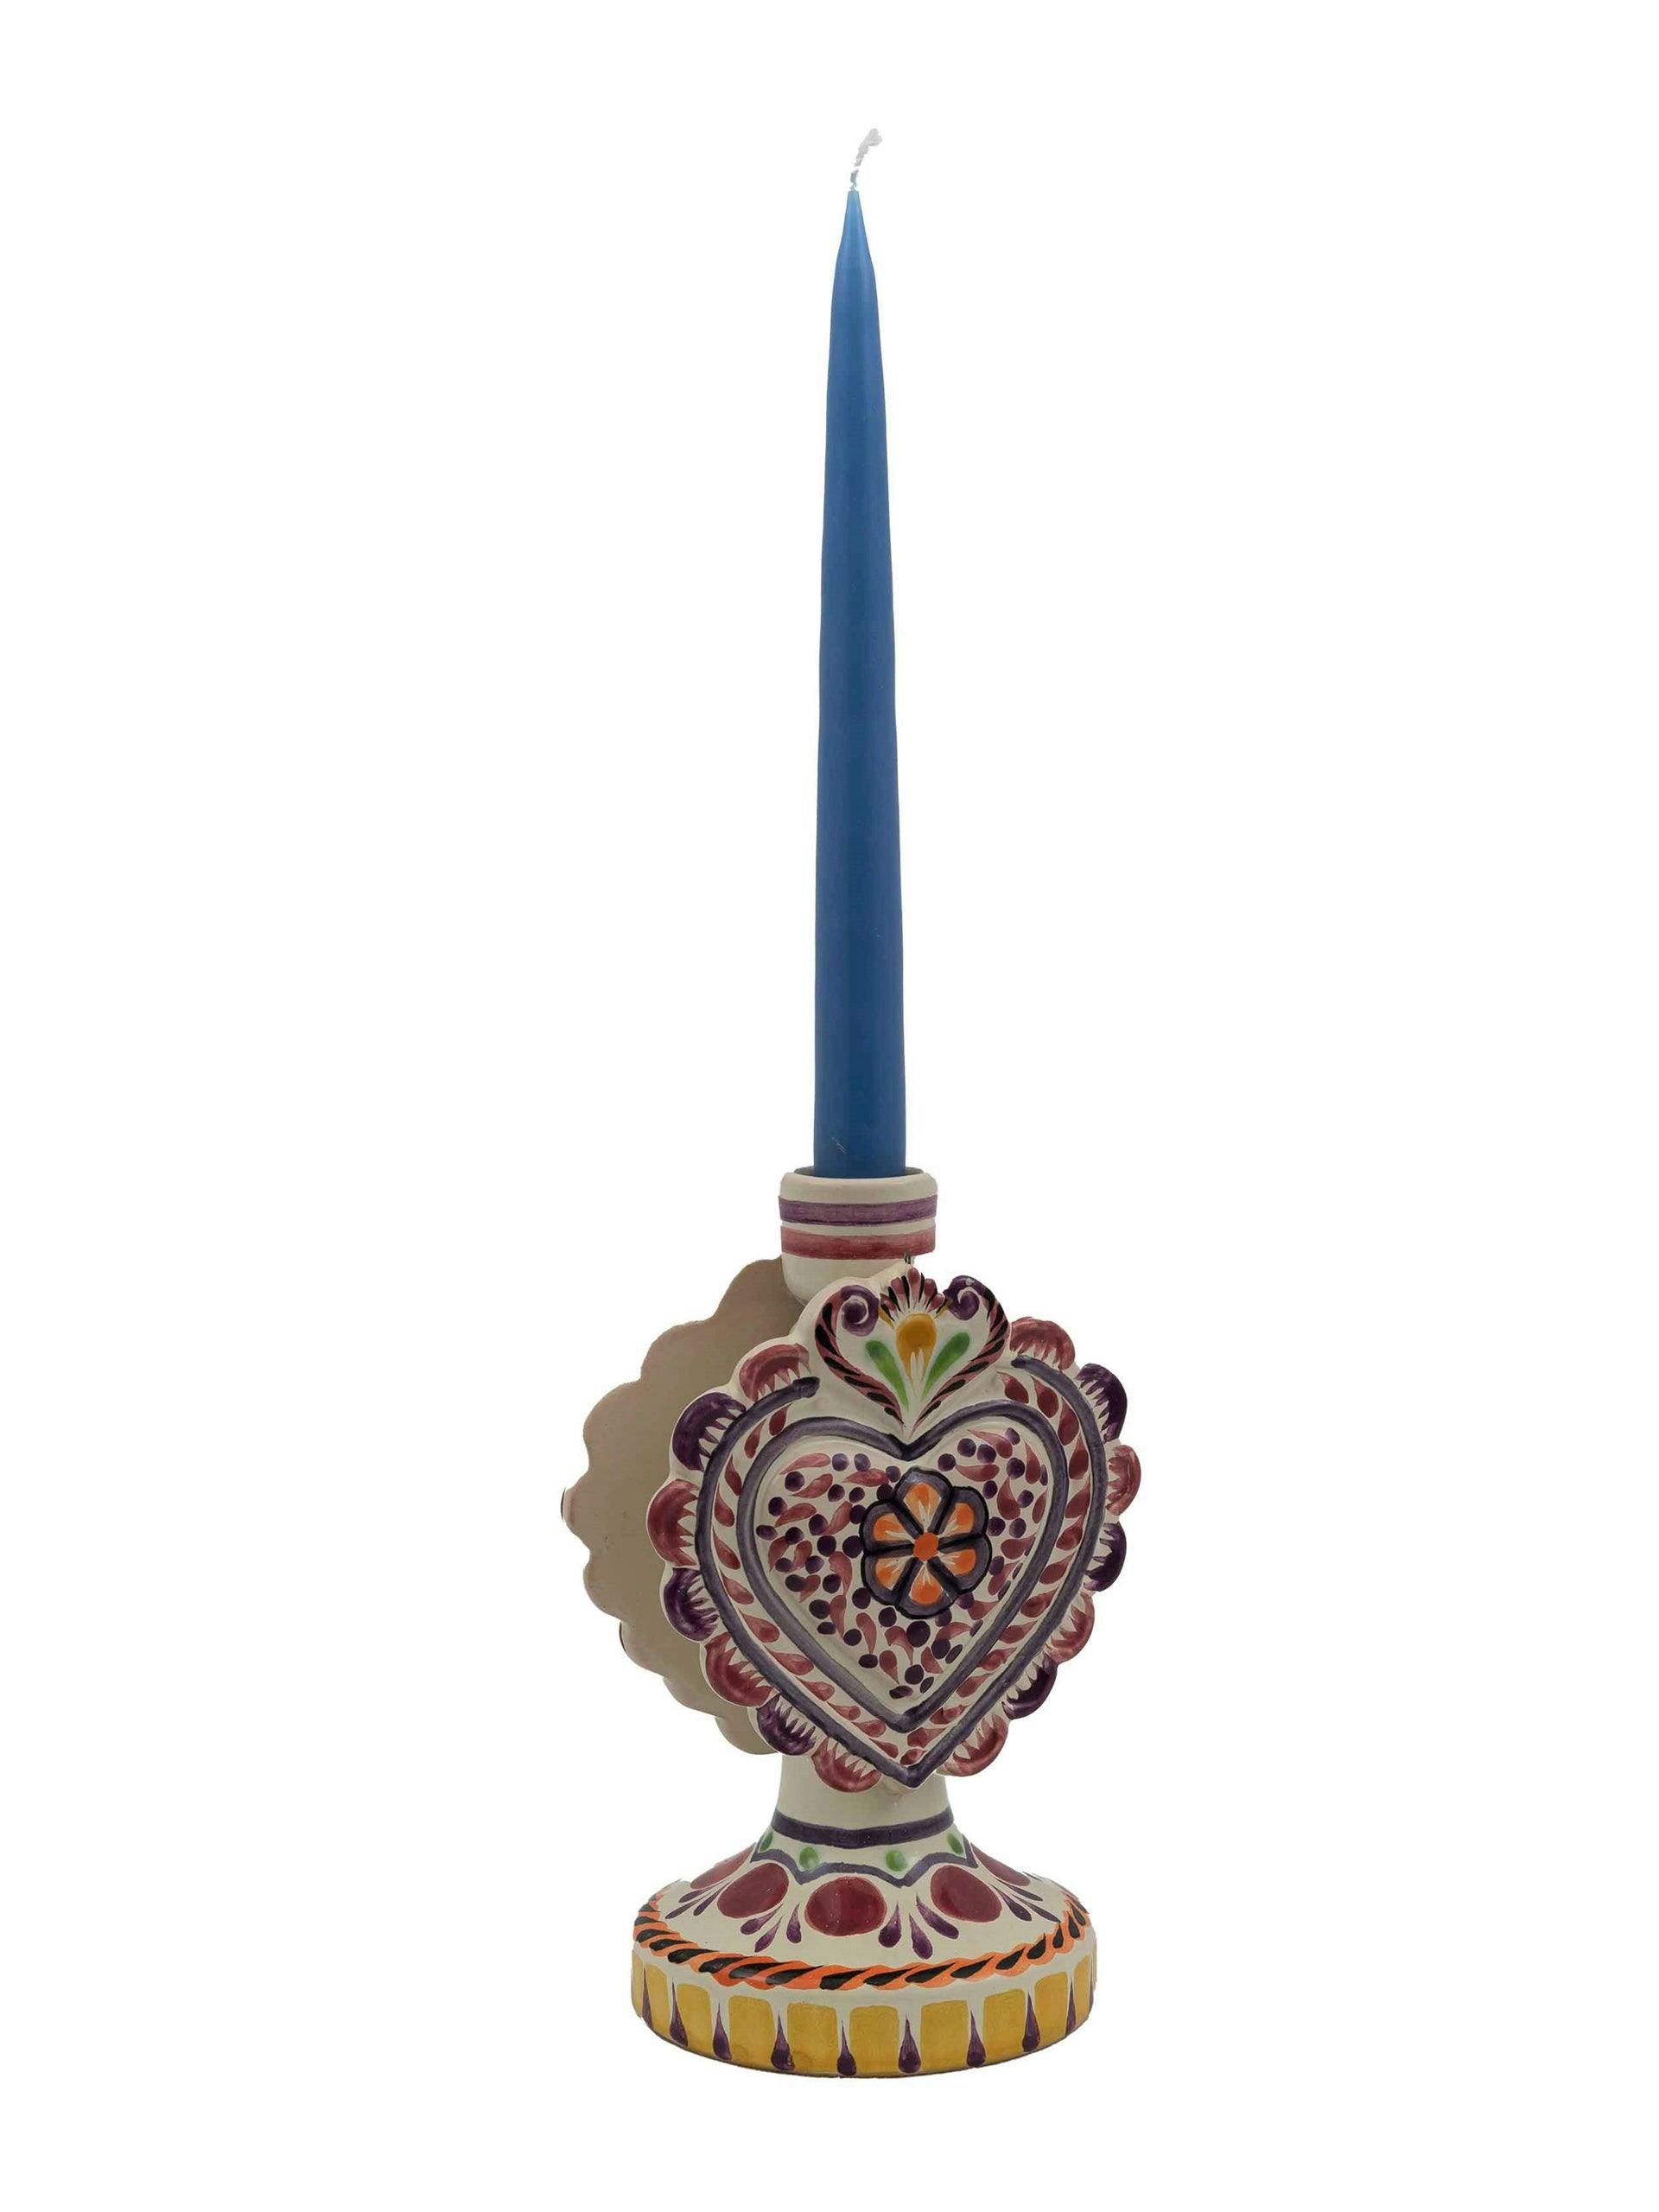 Pink and purple heart candlestick